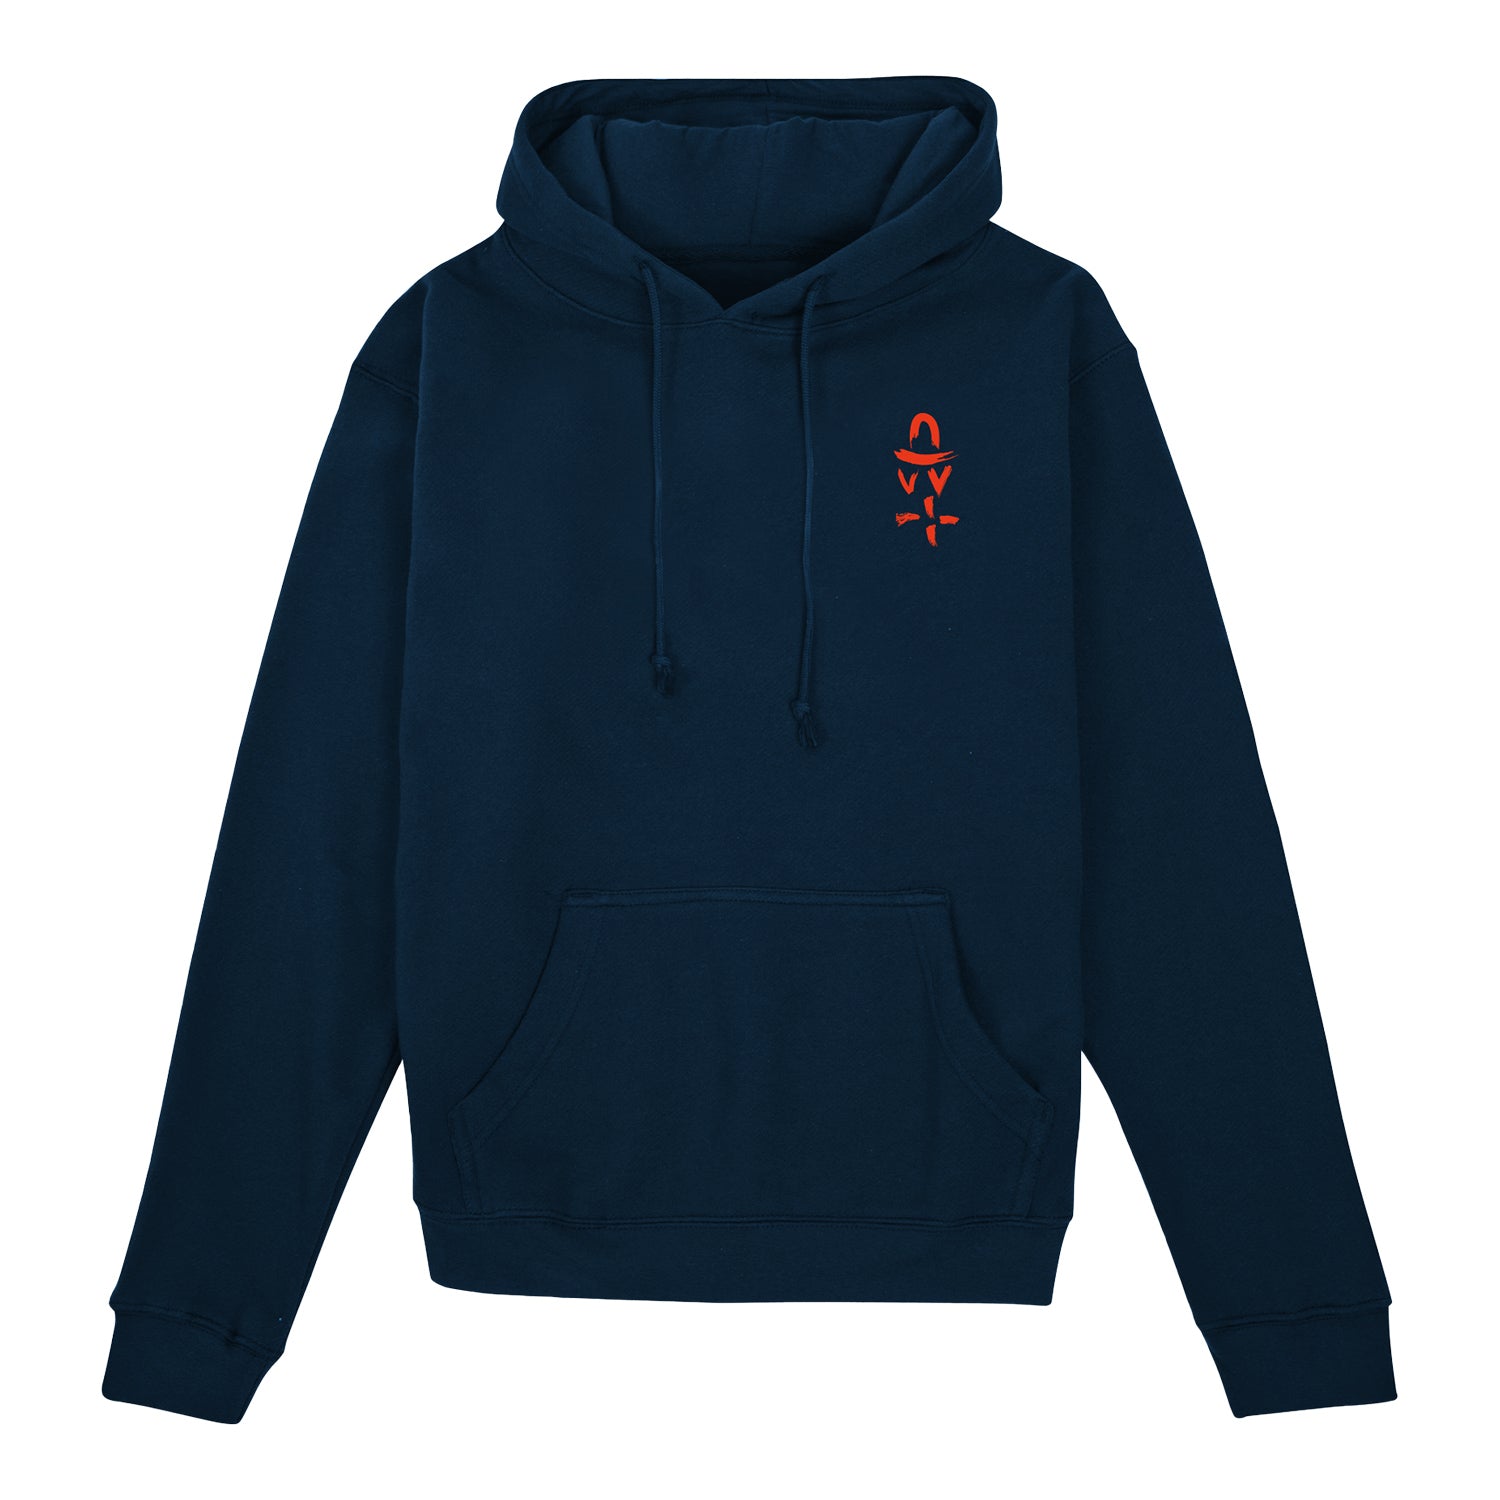 Call of Duty Lil' Arnie Navy Hoodie - Front View